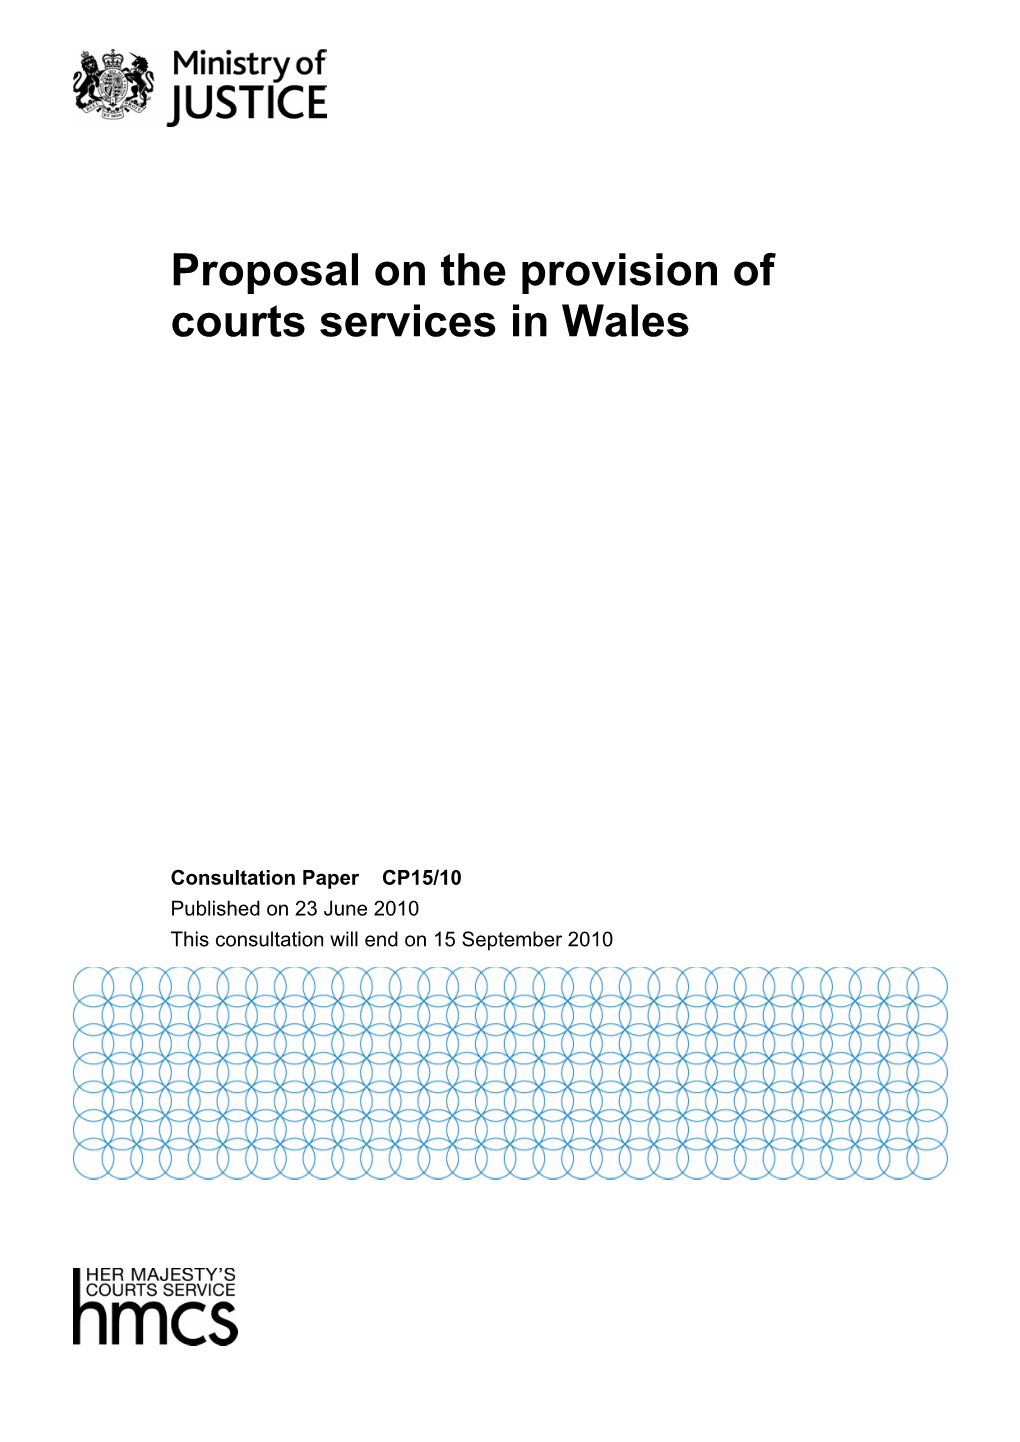 Proposal on the Provision of Courts Services in Wales